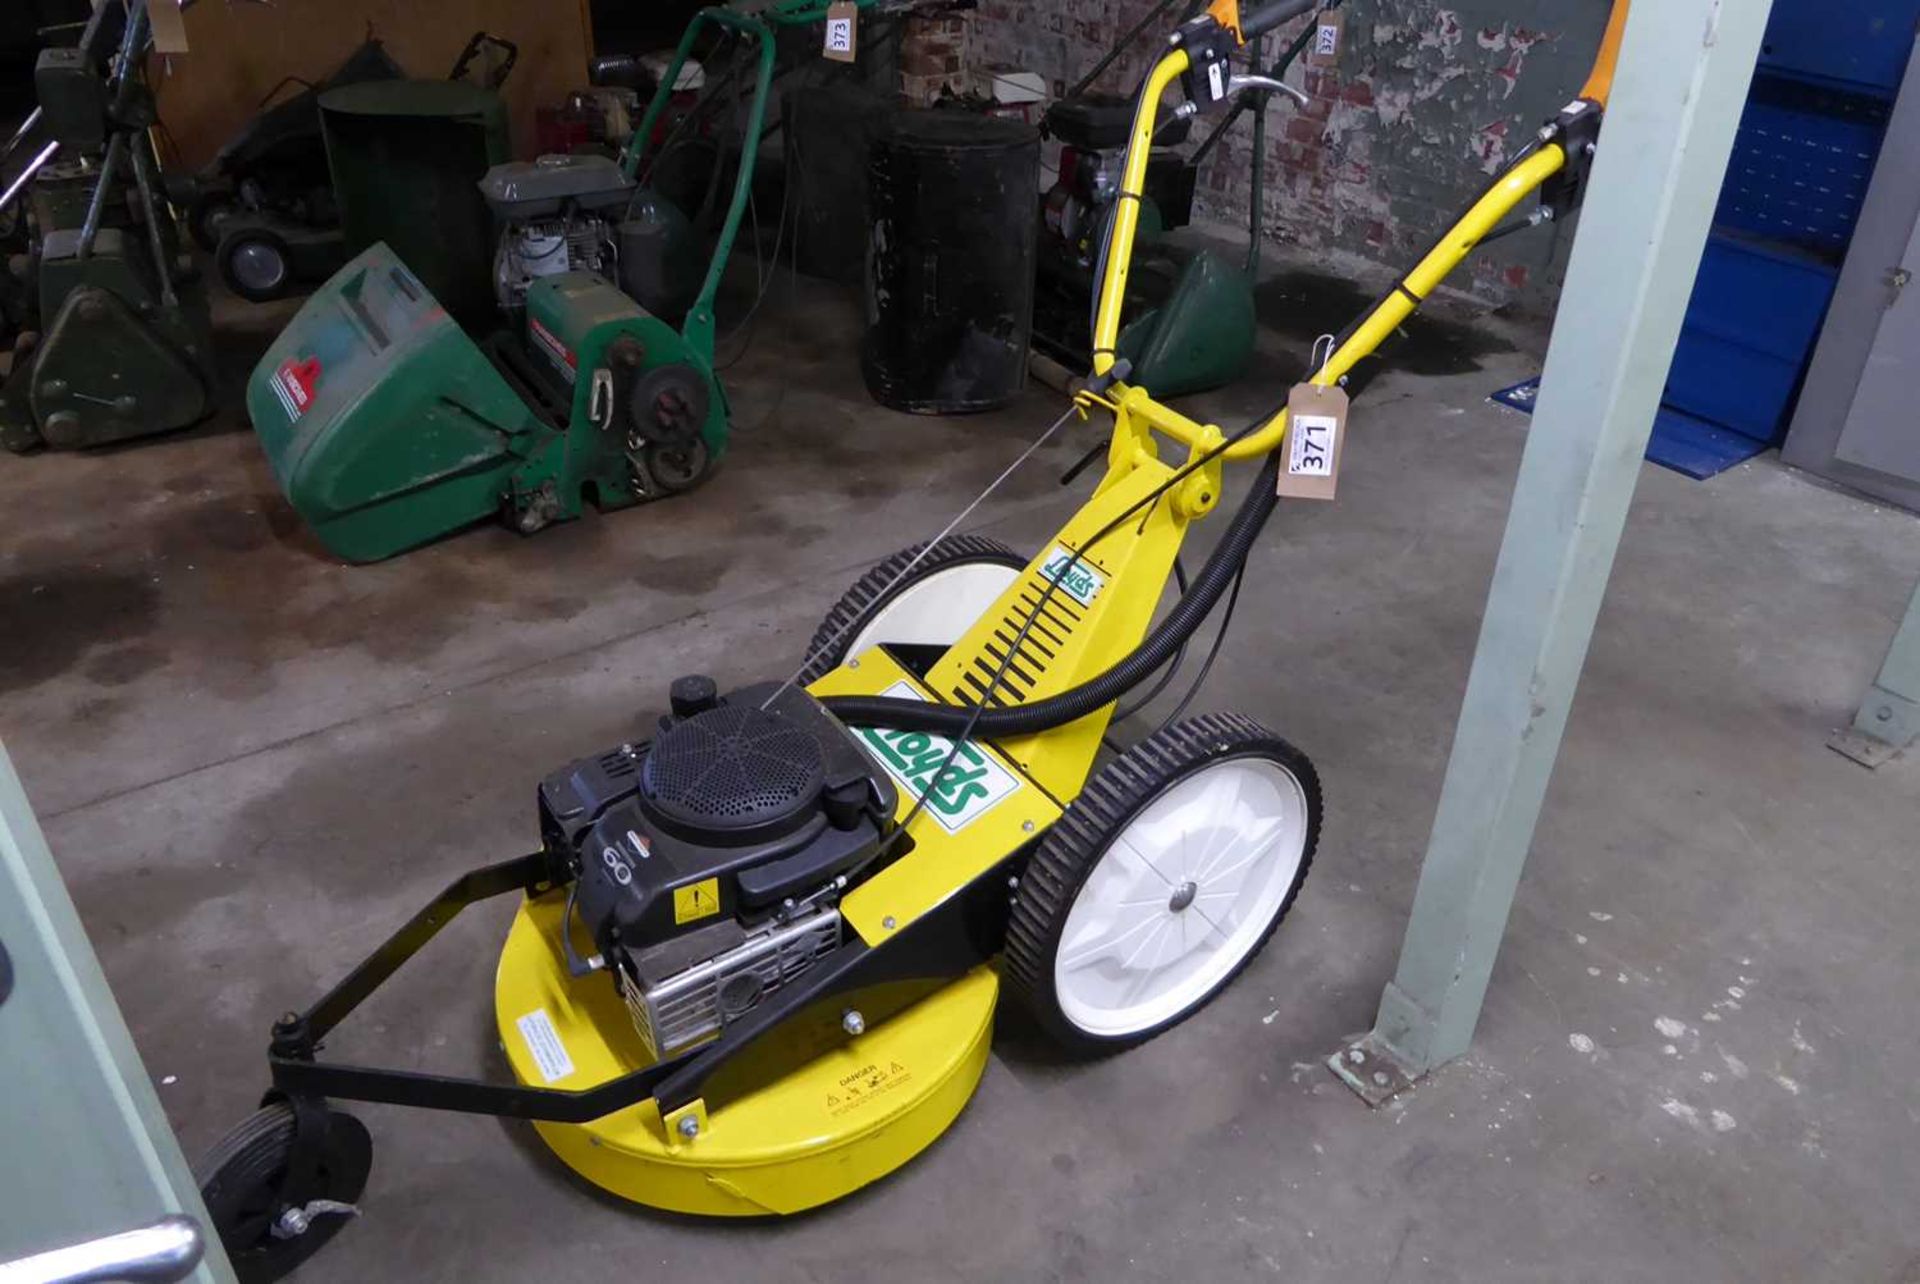 +VAT Lloyds rough cut rotary mower finished in yellow - Briggs & Stratton Quantum 60 petrol engine - Image 2 of 2